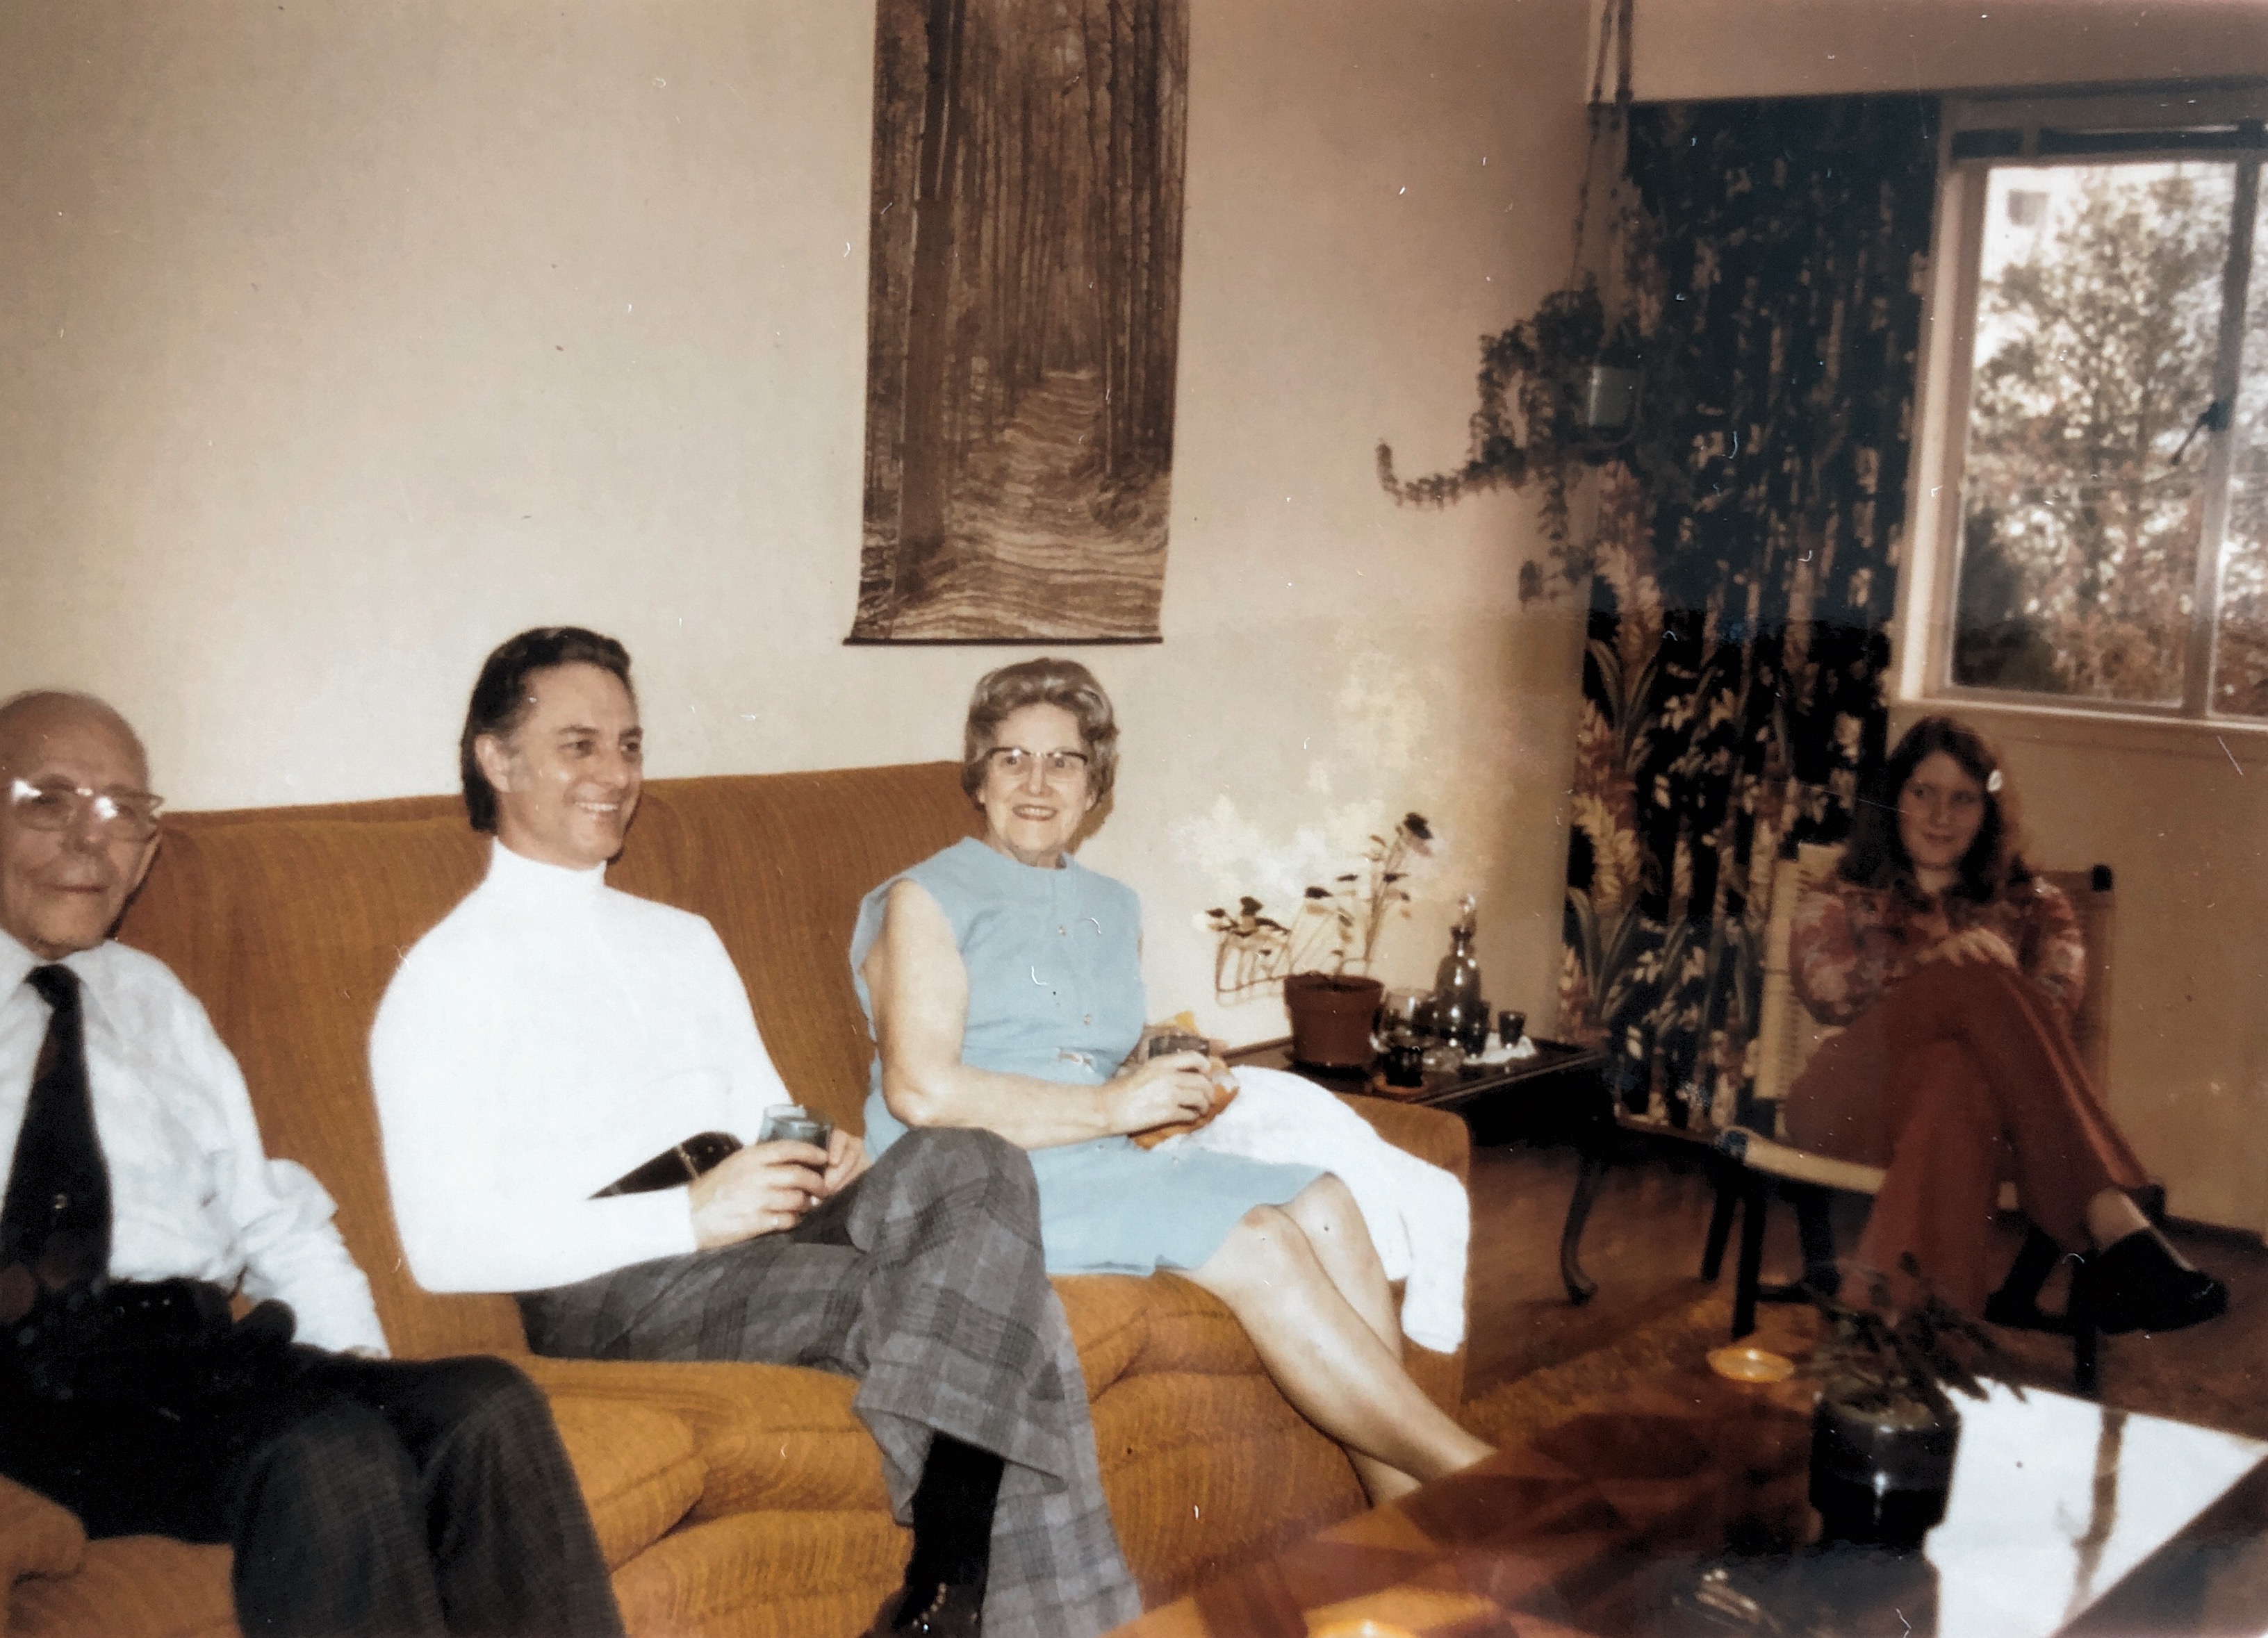 Entertaining my fiancé parents in my apartment. Sister Carol there too 1974/5